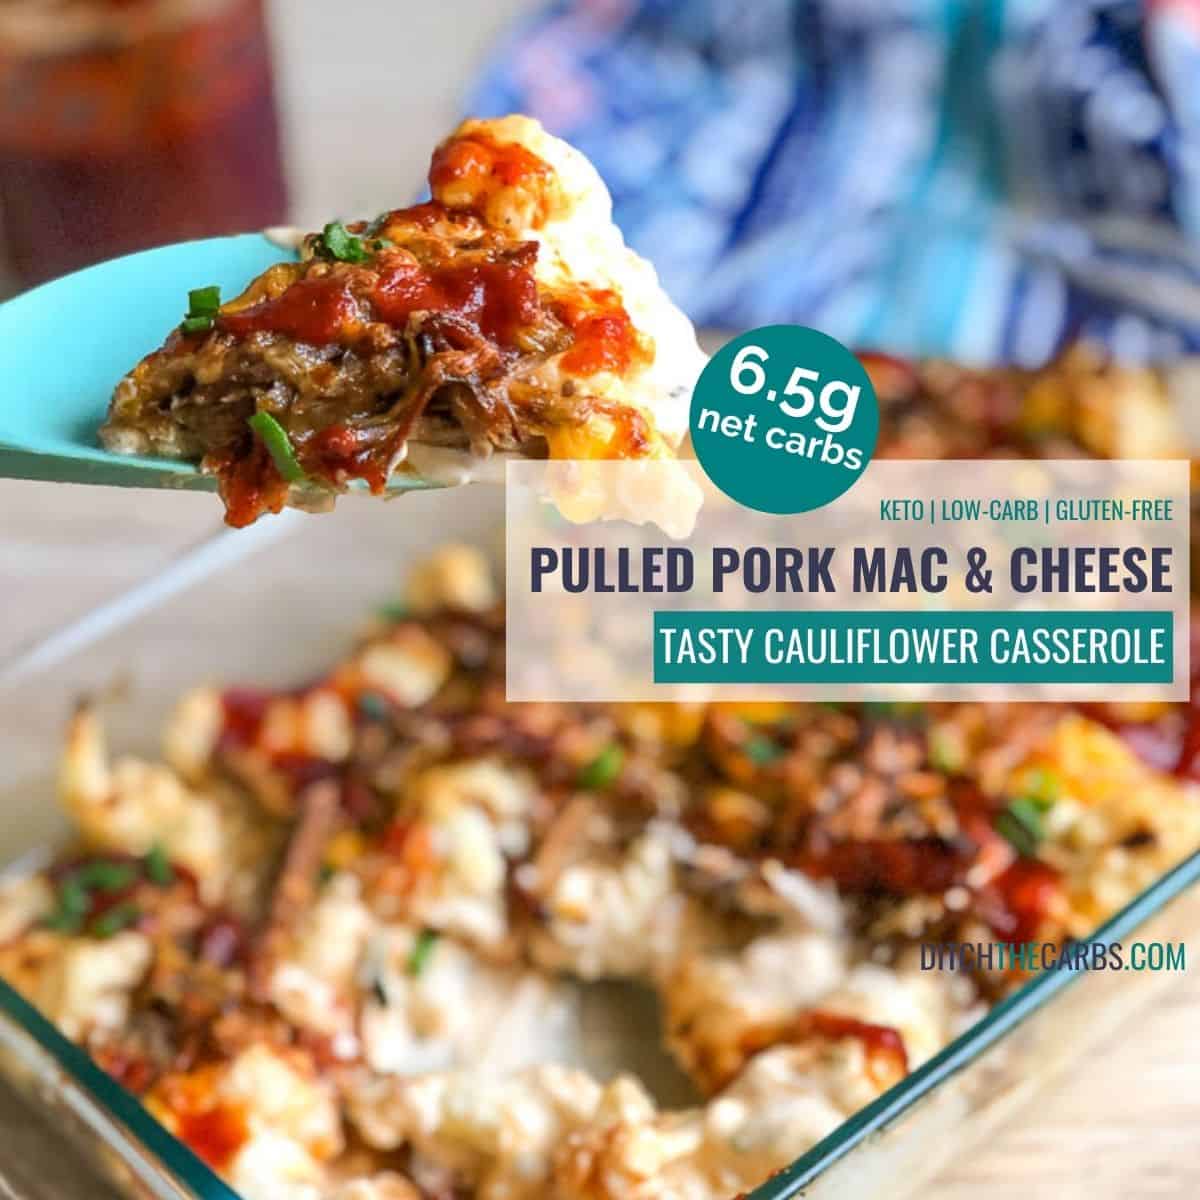 The Best Keto Pulled Pork Mac And Cheese!